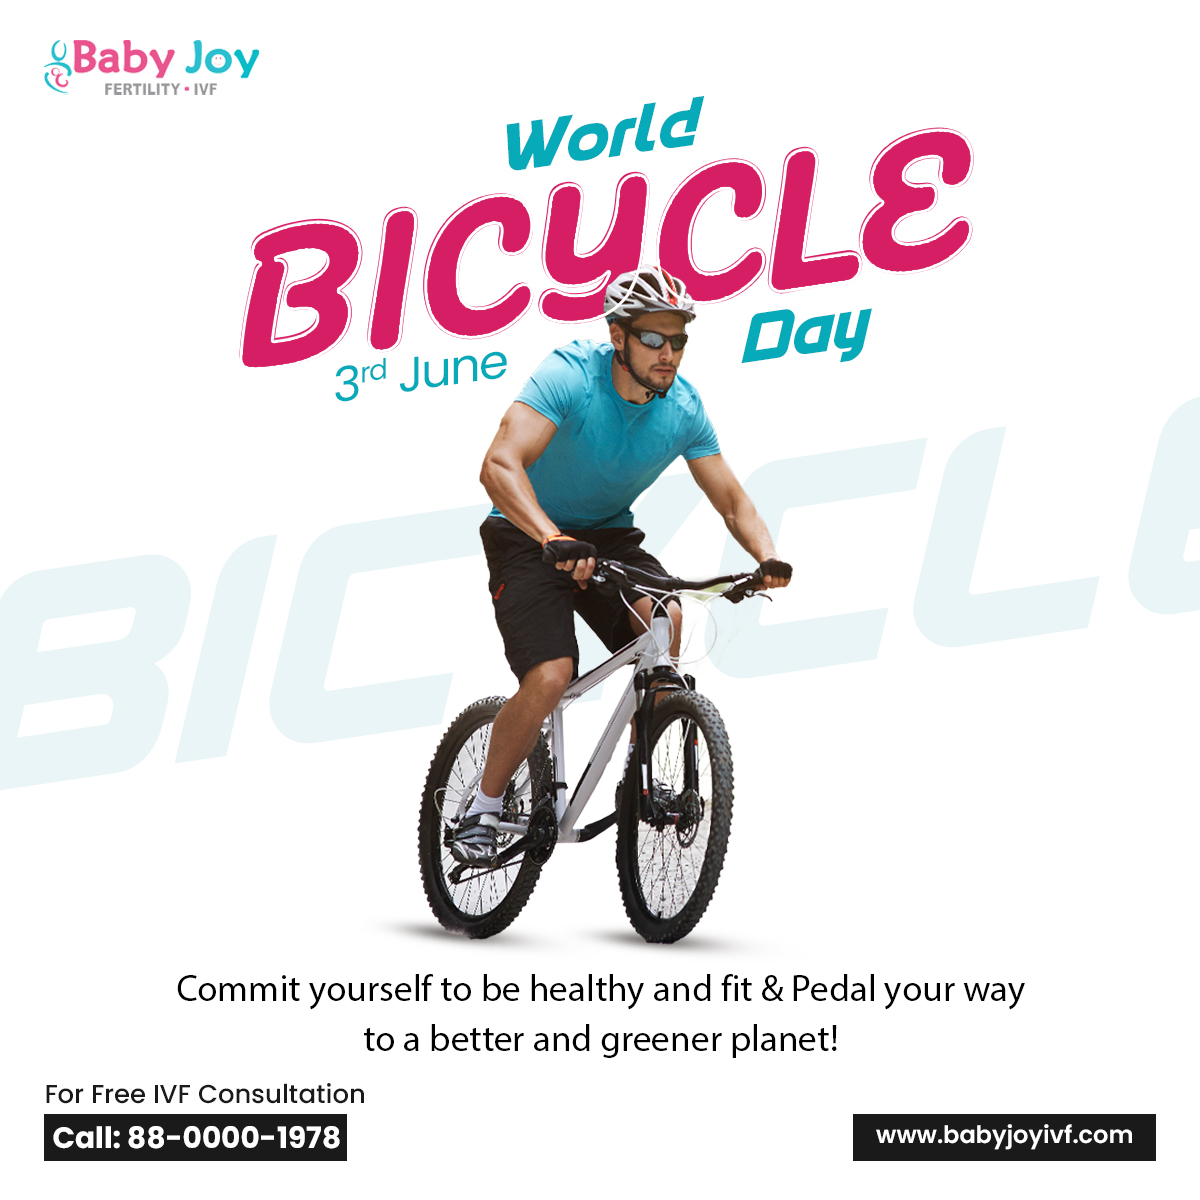 World bicycle day 2023

Cycling five or more hours a week is associated with low sperm count and poor sperm motility in men.

#WorldBicycleDay #bicycleday #bicycle #gogreen #environment #stayhealthy #fitindia #cycling #cyclinglife #maleinfertility #BoostFertility #spermcount